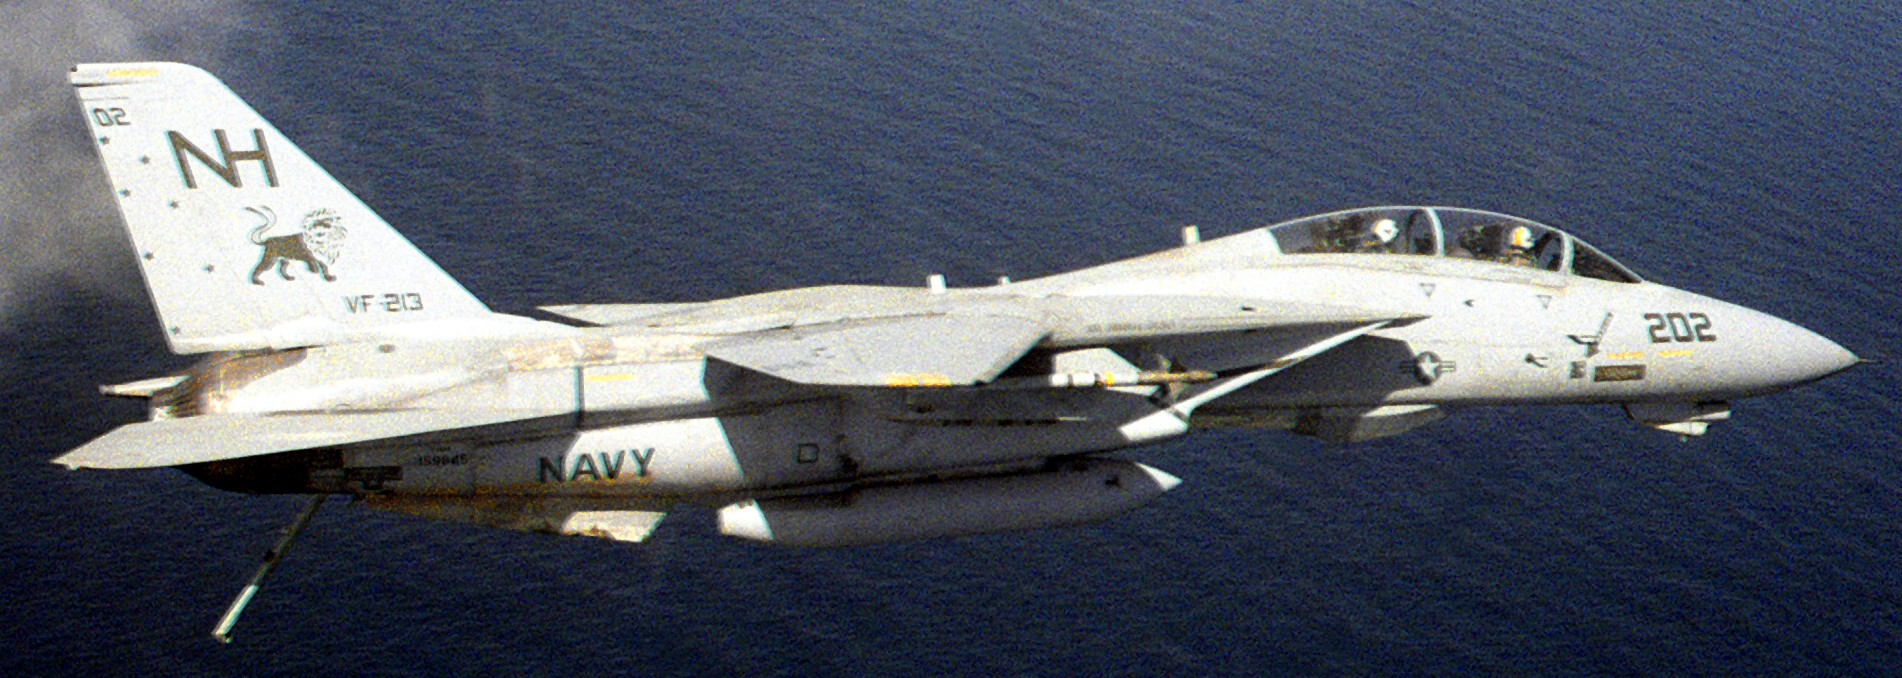 vf-213 black lions fighter squadron us navy f-14a tomcat carrier air wing cvw-11 uss abraham lincoln cvn-72 61